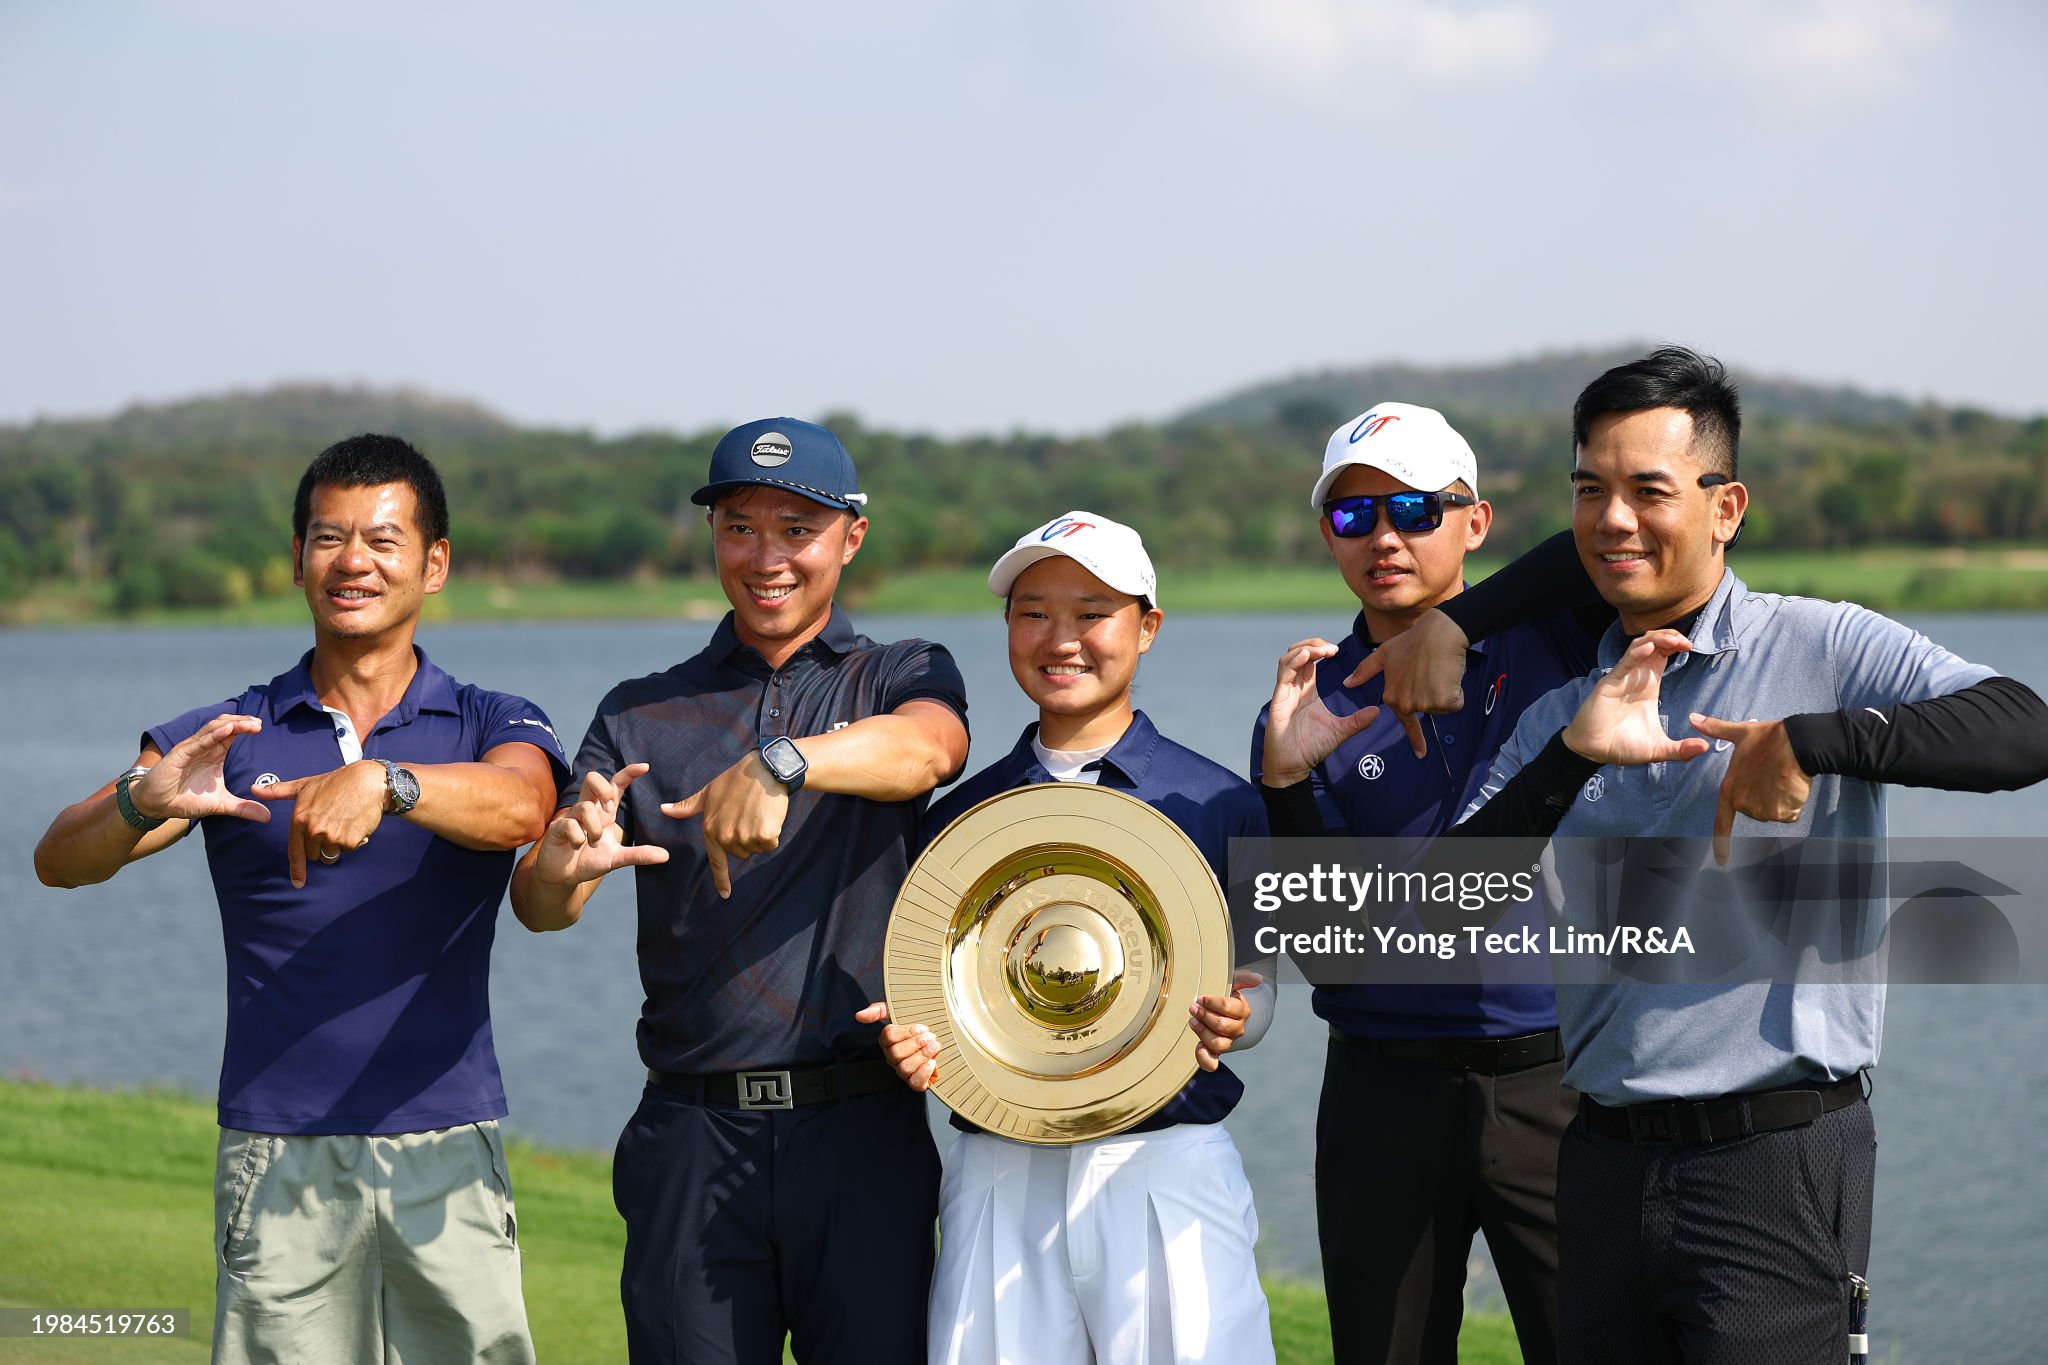 https://media.gettyimages.com/id/1984519763/photo/the-womens-amateur-asia-pacific-championship-day-four.jpg?s=2048x2048&w=gi&k=20&c=KpGvhlRyYuPIXlHglPodO_OKd2M1Y_3AbIE4ZaMTghU=